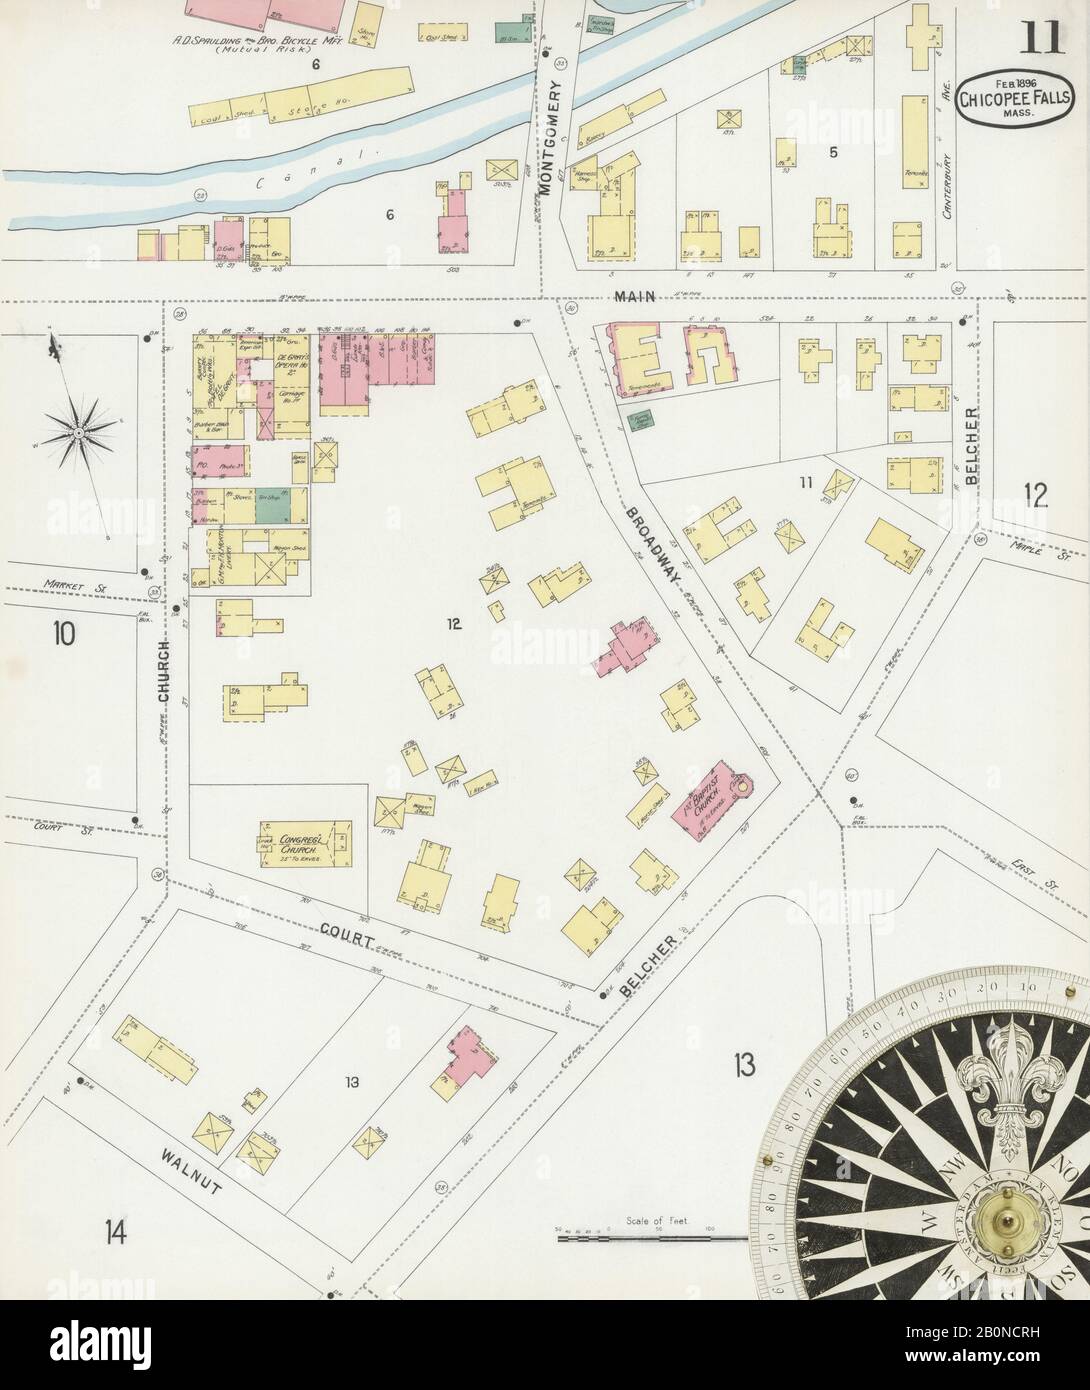 Image 11 of Sanborn Fire Insurance Map from Chicopee, Hampden County, Massachusetts. Feb 1896. 16 Sheet(s). Includes Chicopee Falls, America, street map with a Nineteenth Century compass Stock Photo